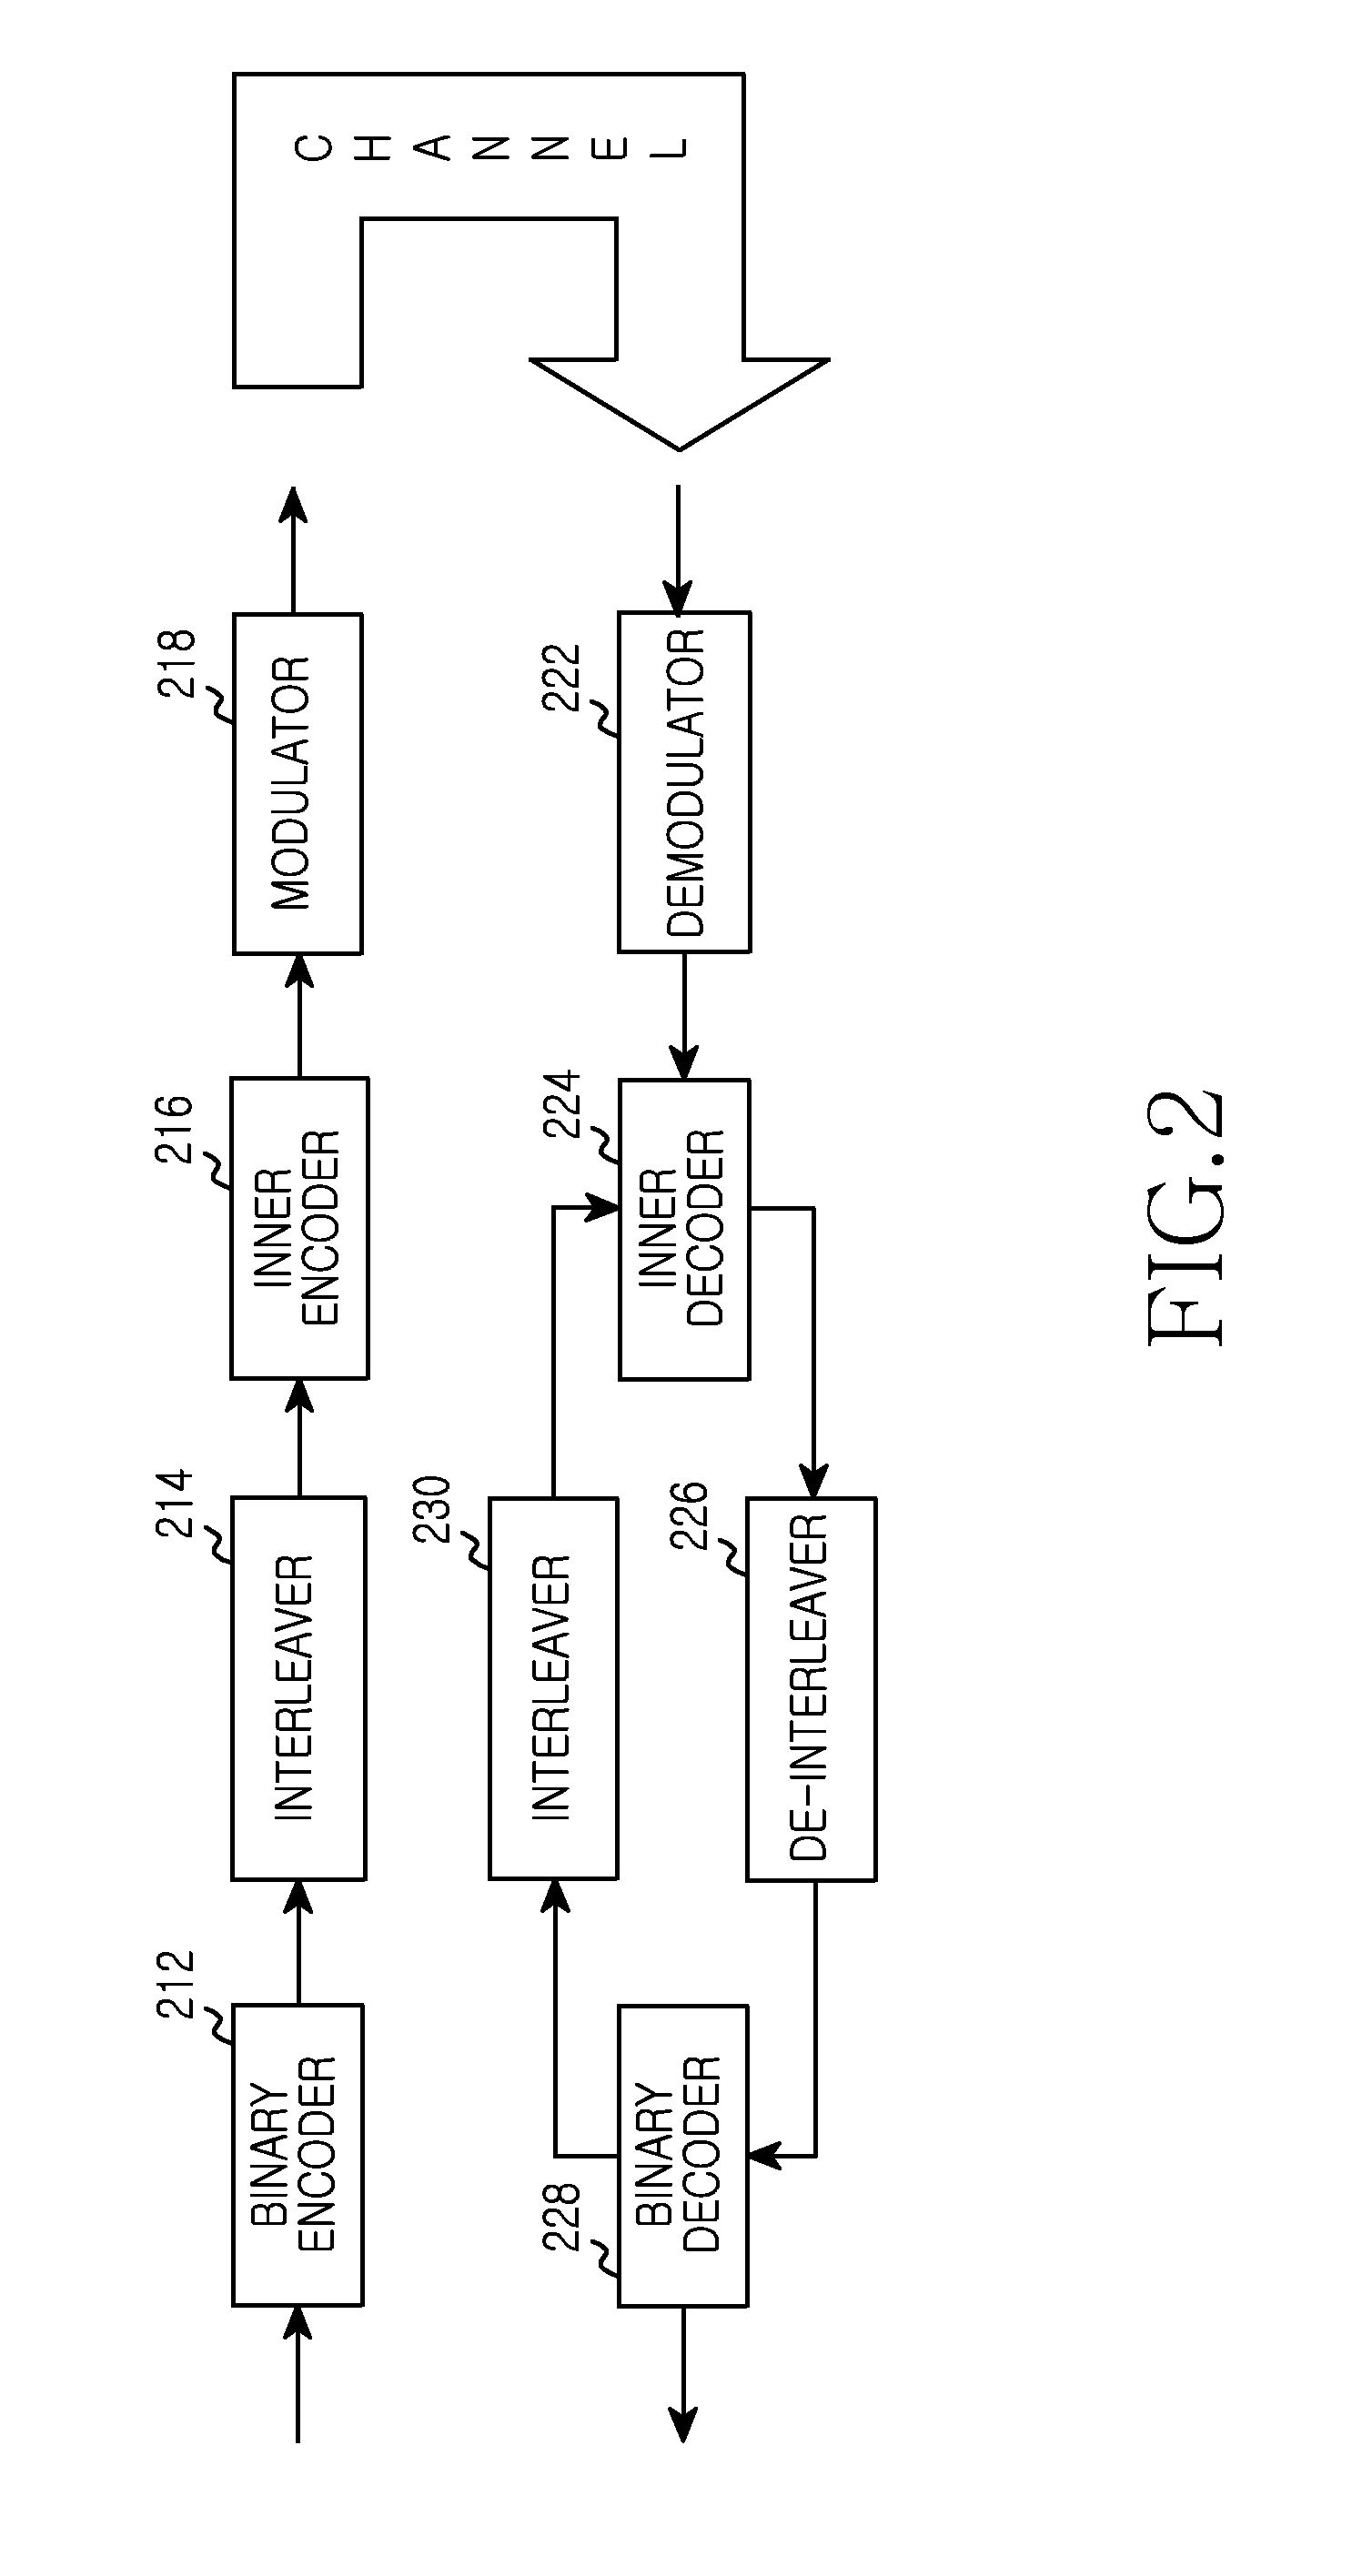 Apparatus and method for adaptively selecting channel code based on non-gaussianity of channel in wireless communication system